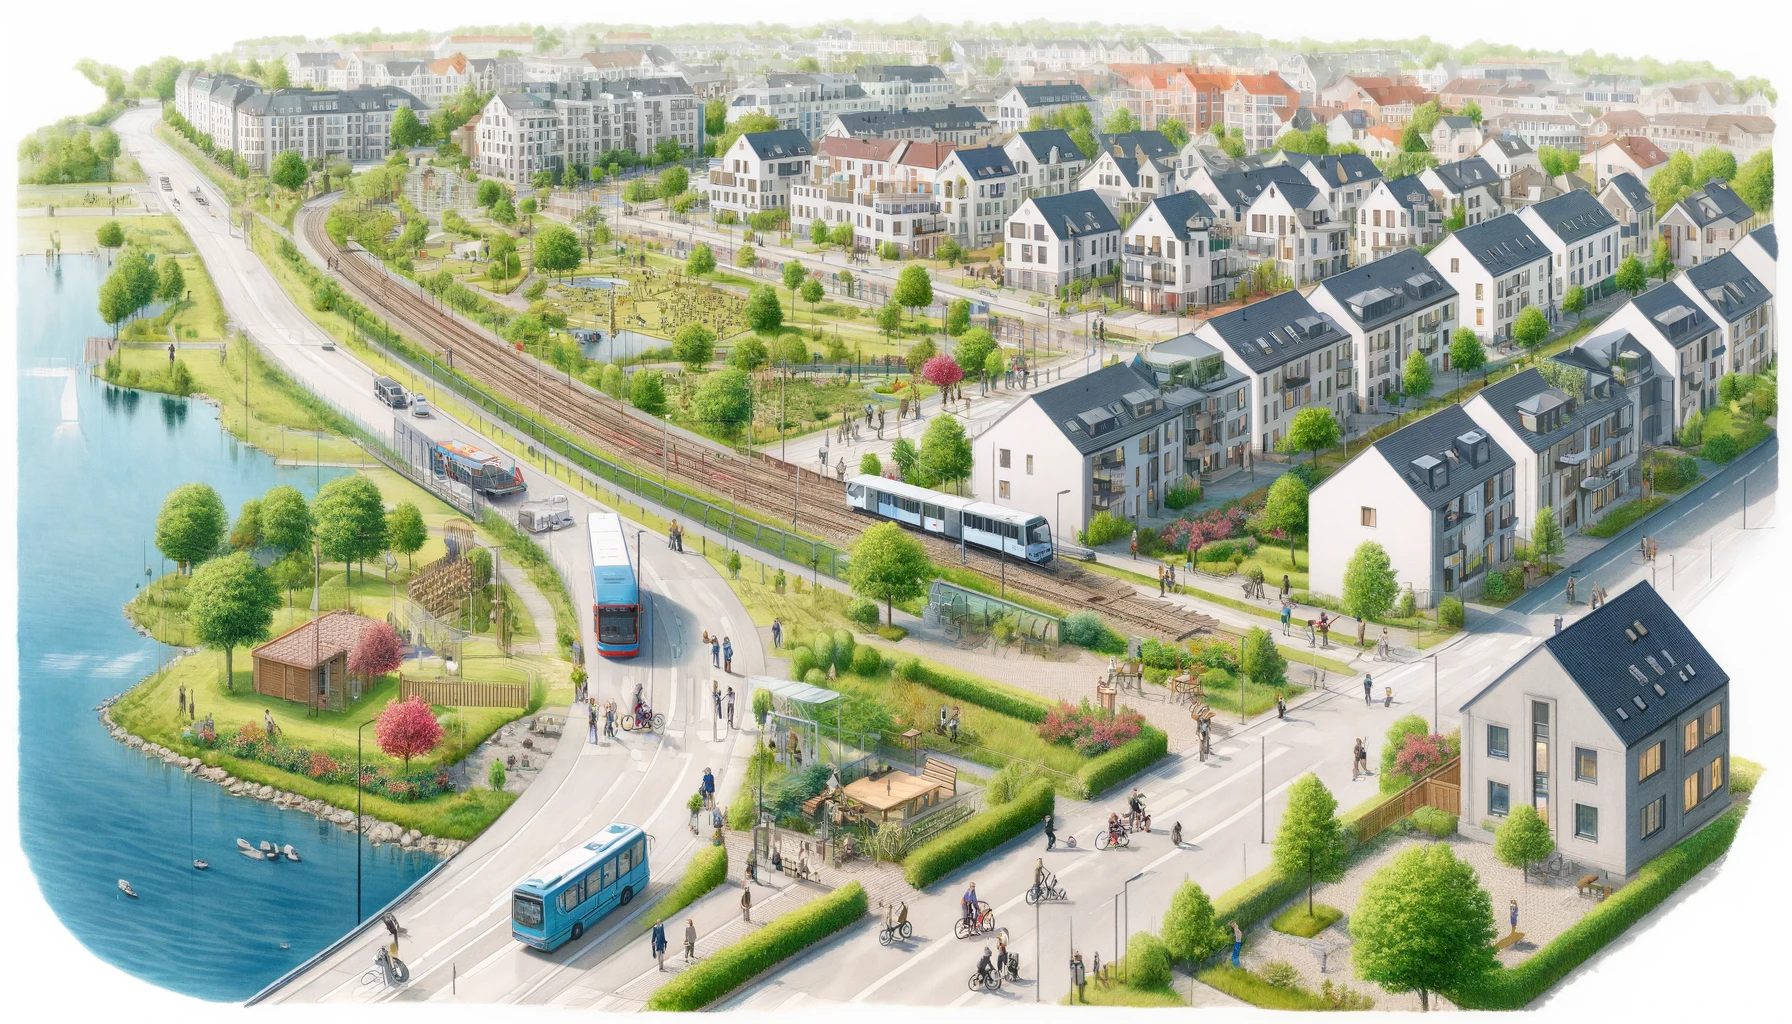 A detailed drawing of a Danish neighborhood featuring a variety of residential houses, lush green parks, public transport options like buses.